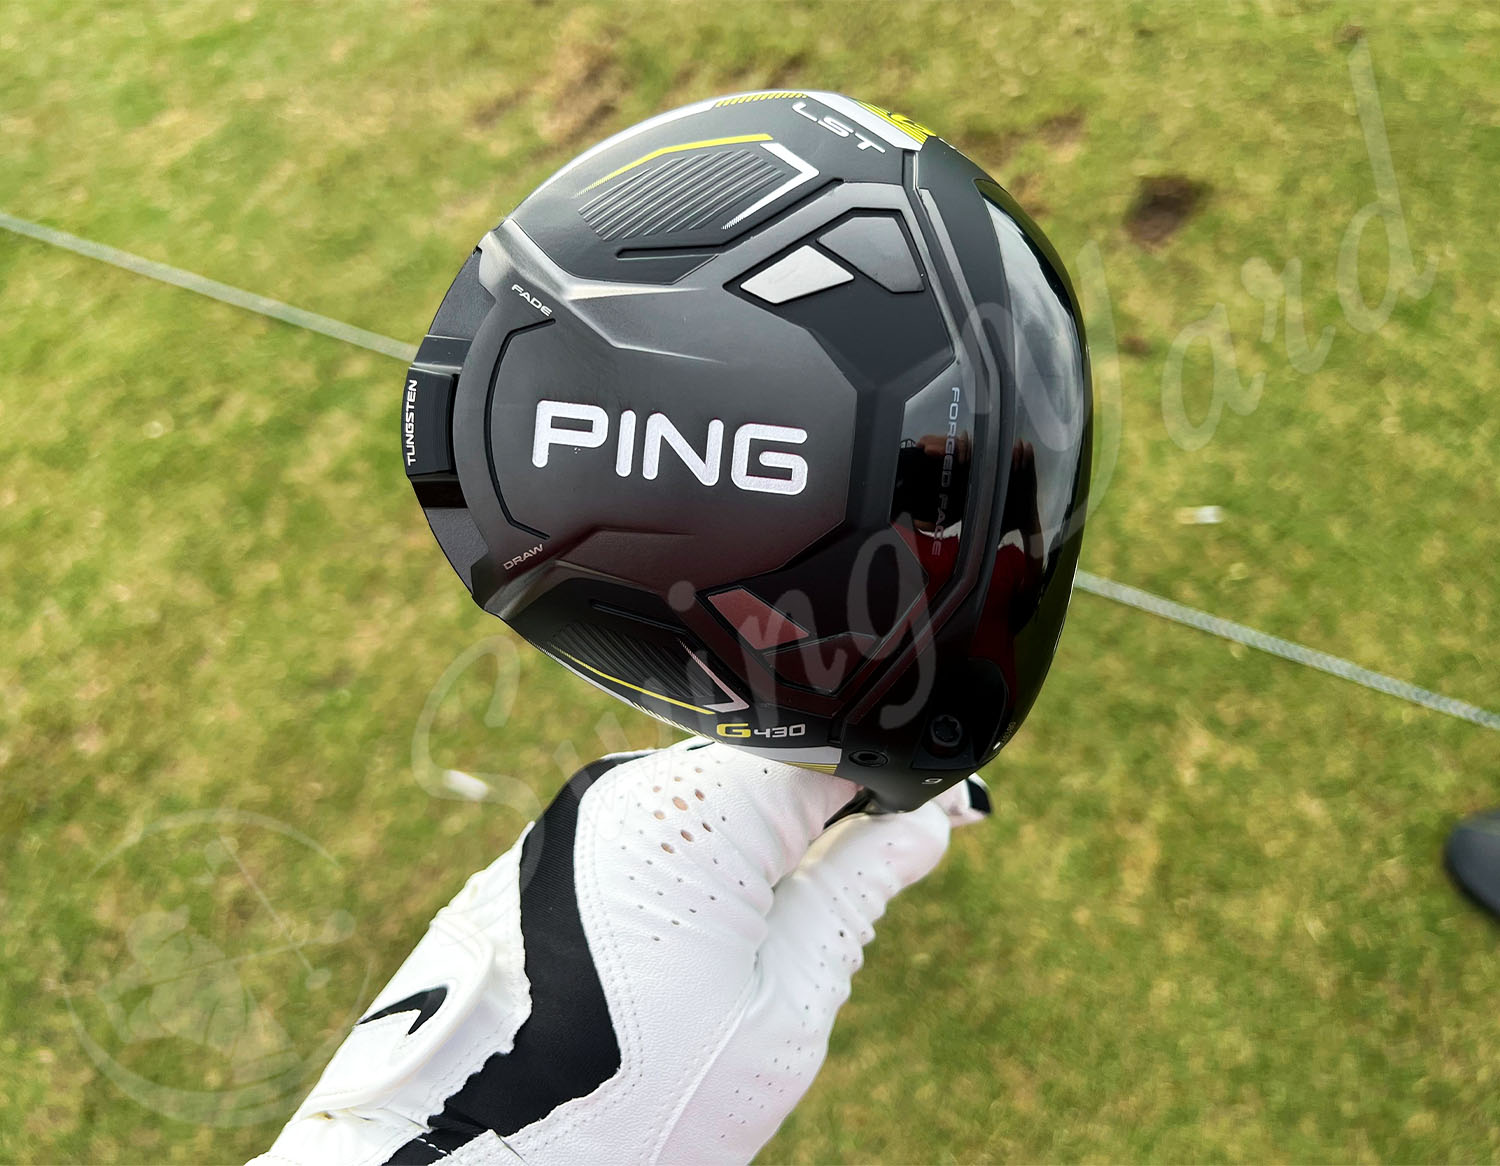 Ping driver for testing